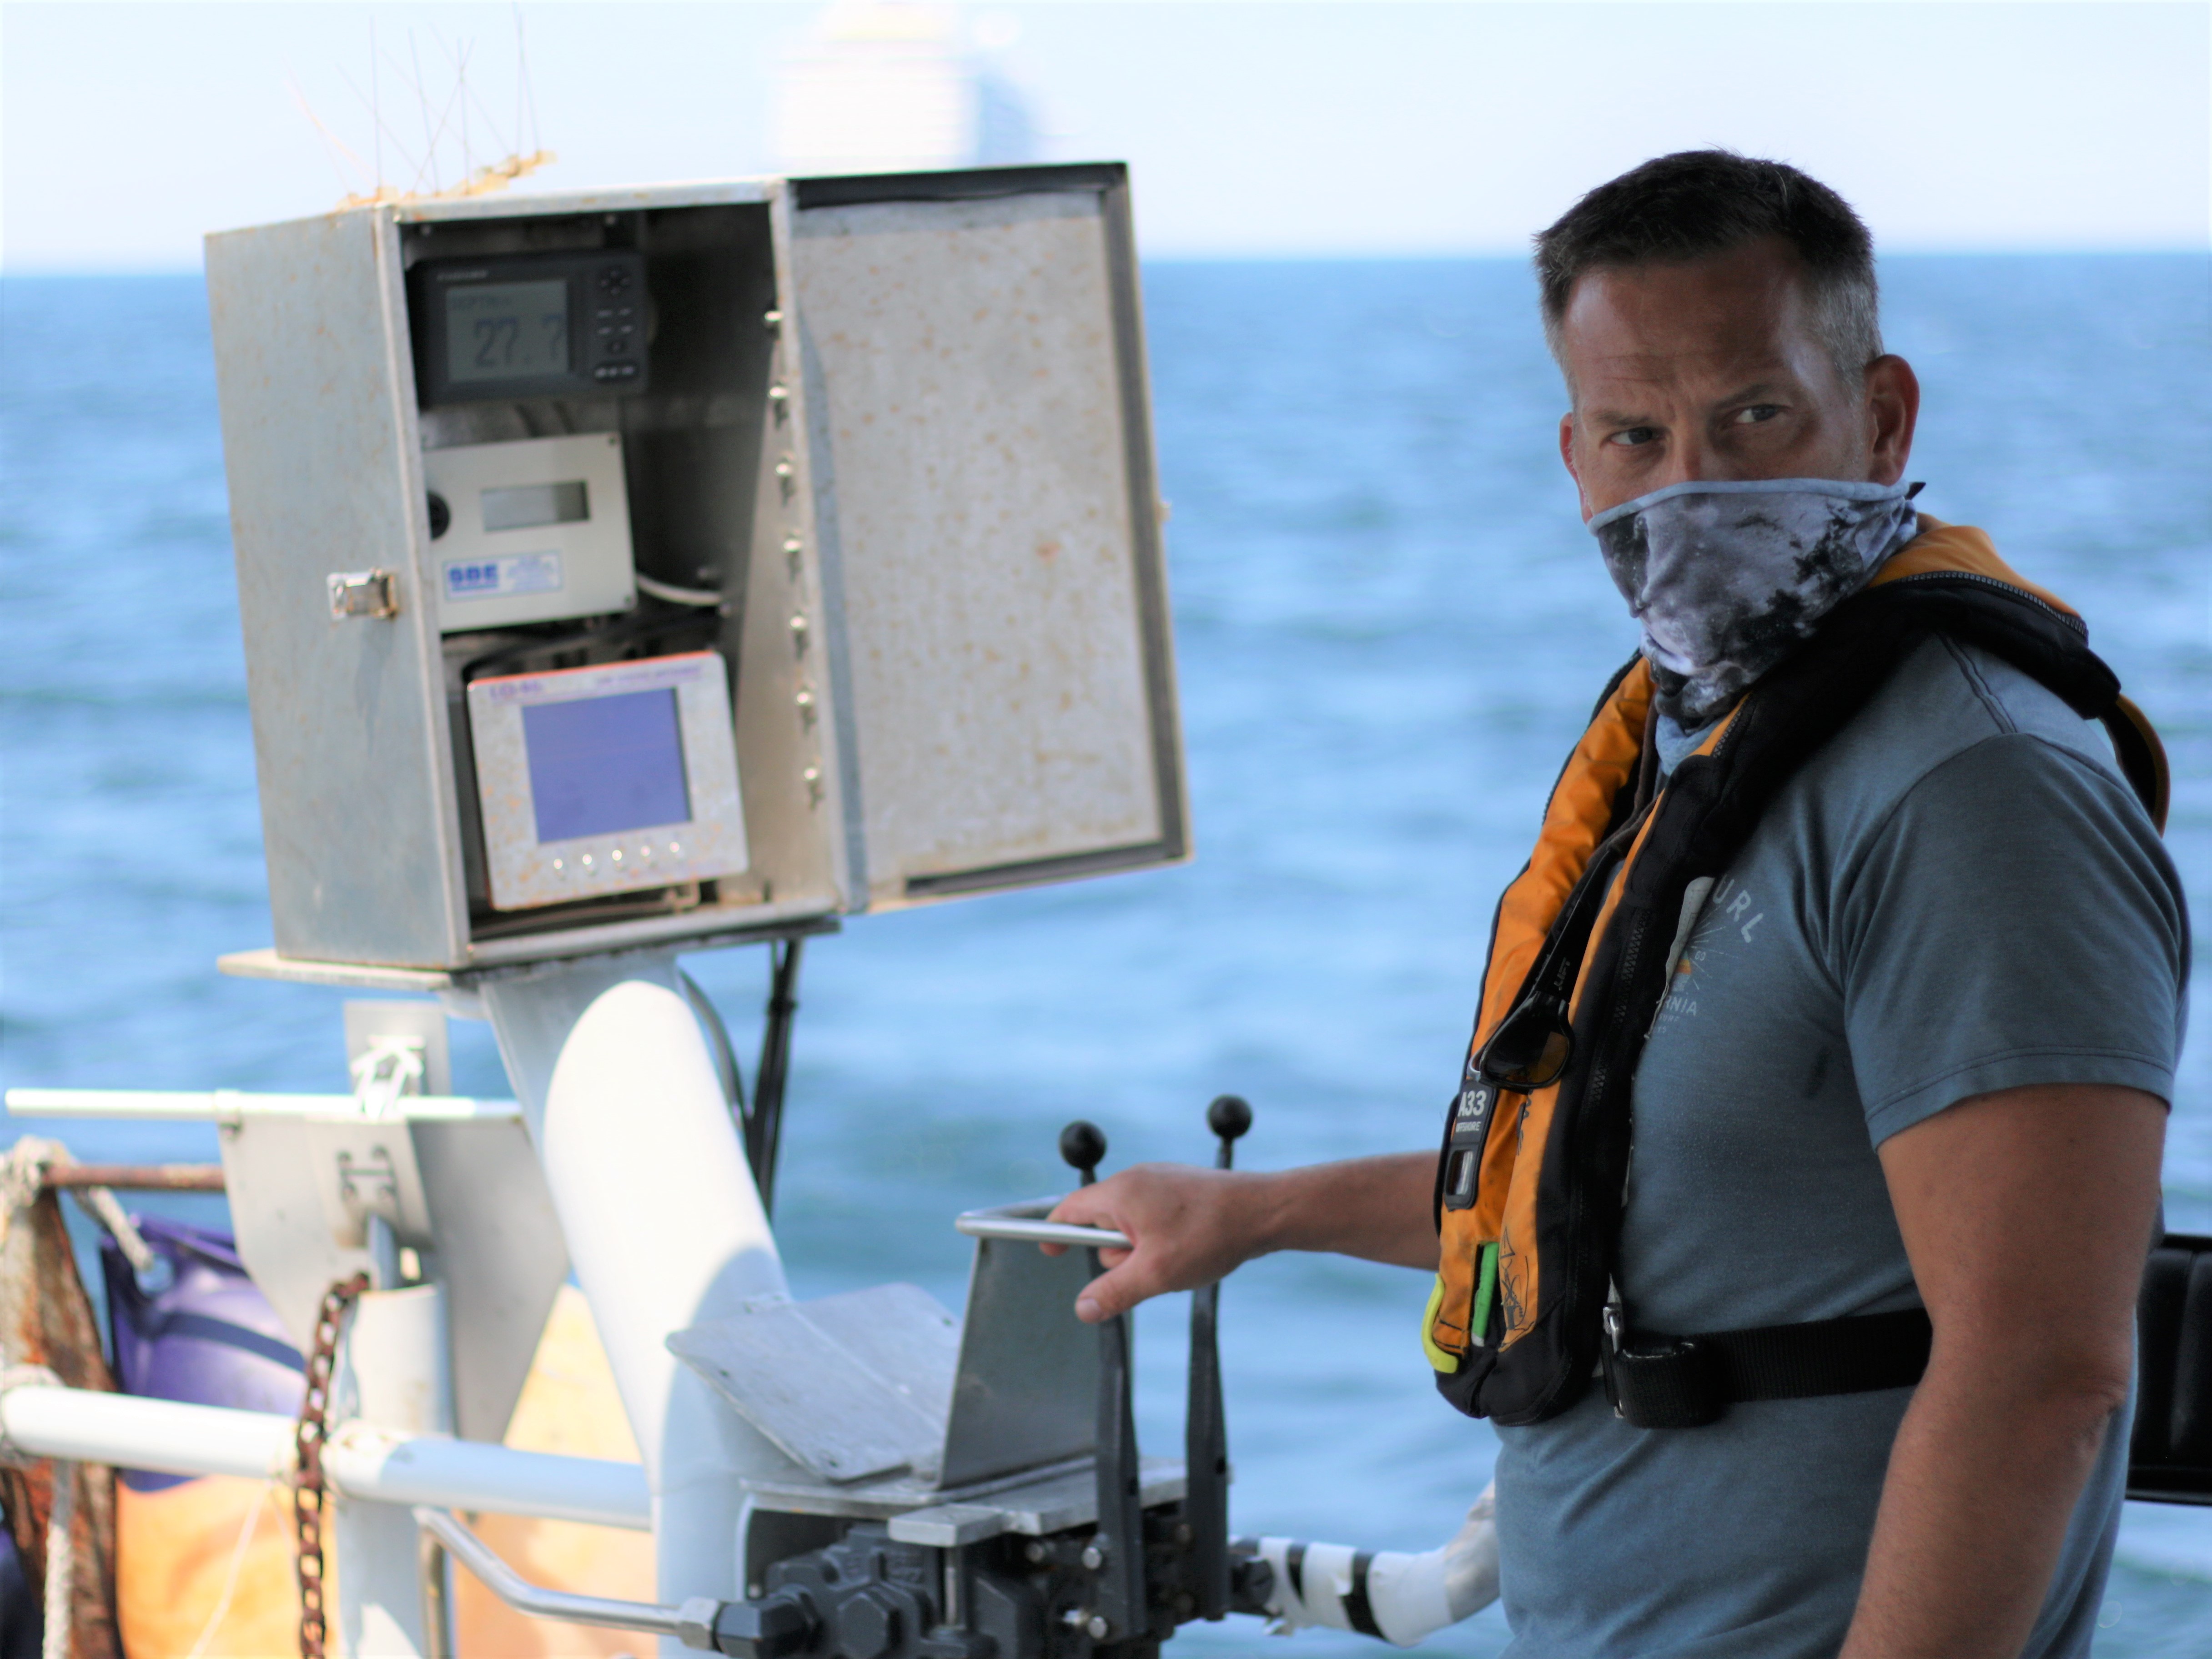 A marine biologist runs the winch, which raises and lowers oceanographic equipment from the stern of the vessel.